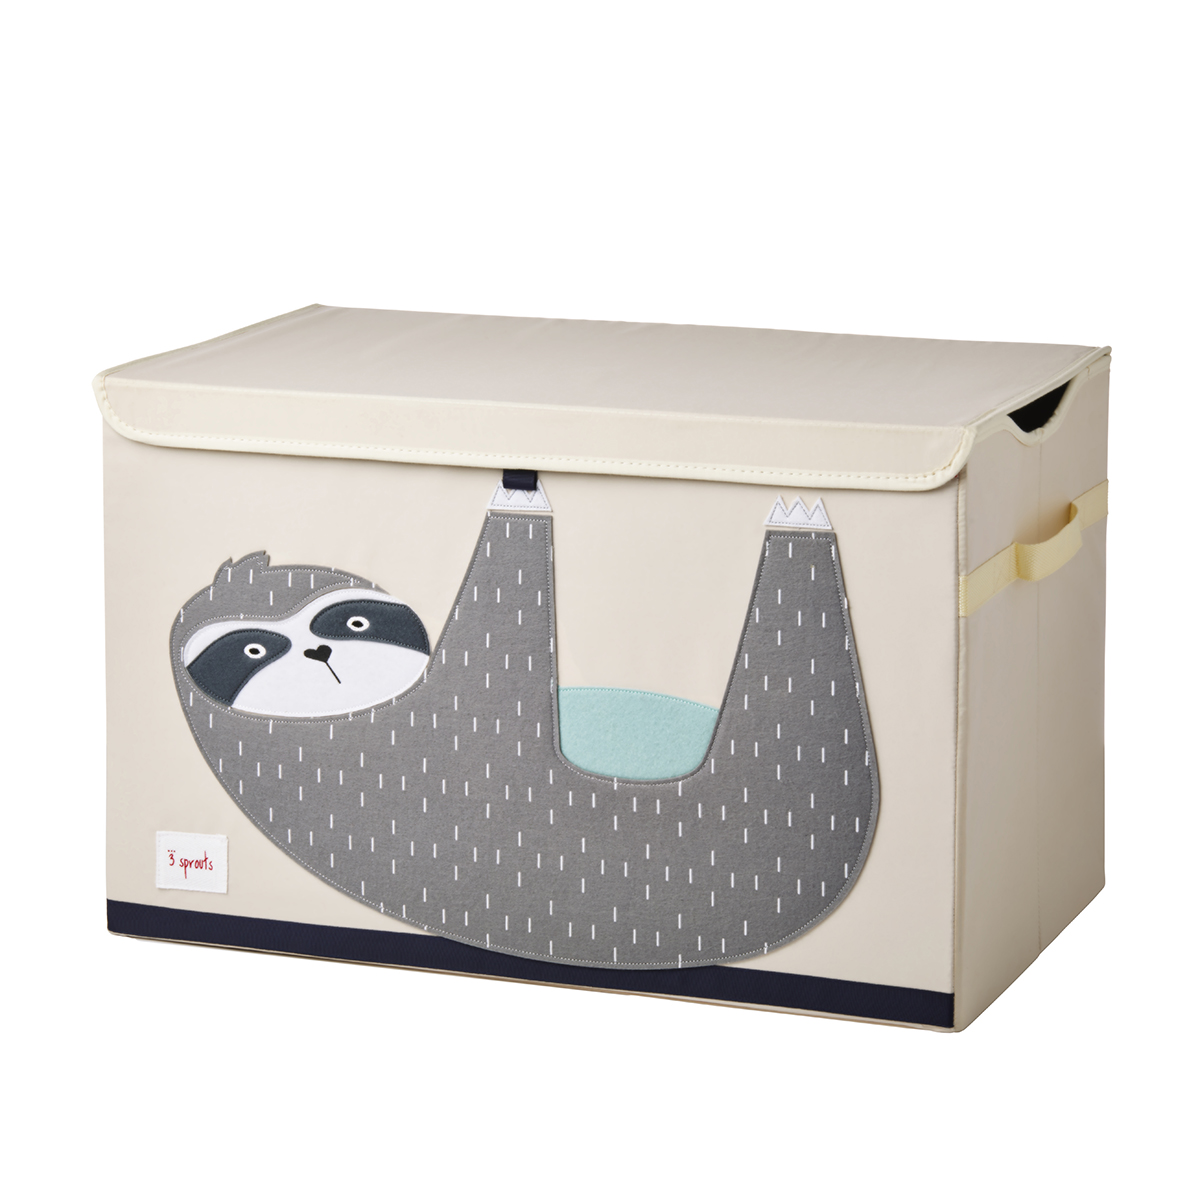 3 Sprouts Sloth Toy Chest